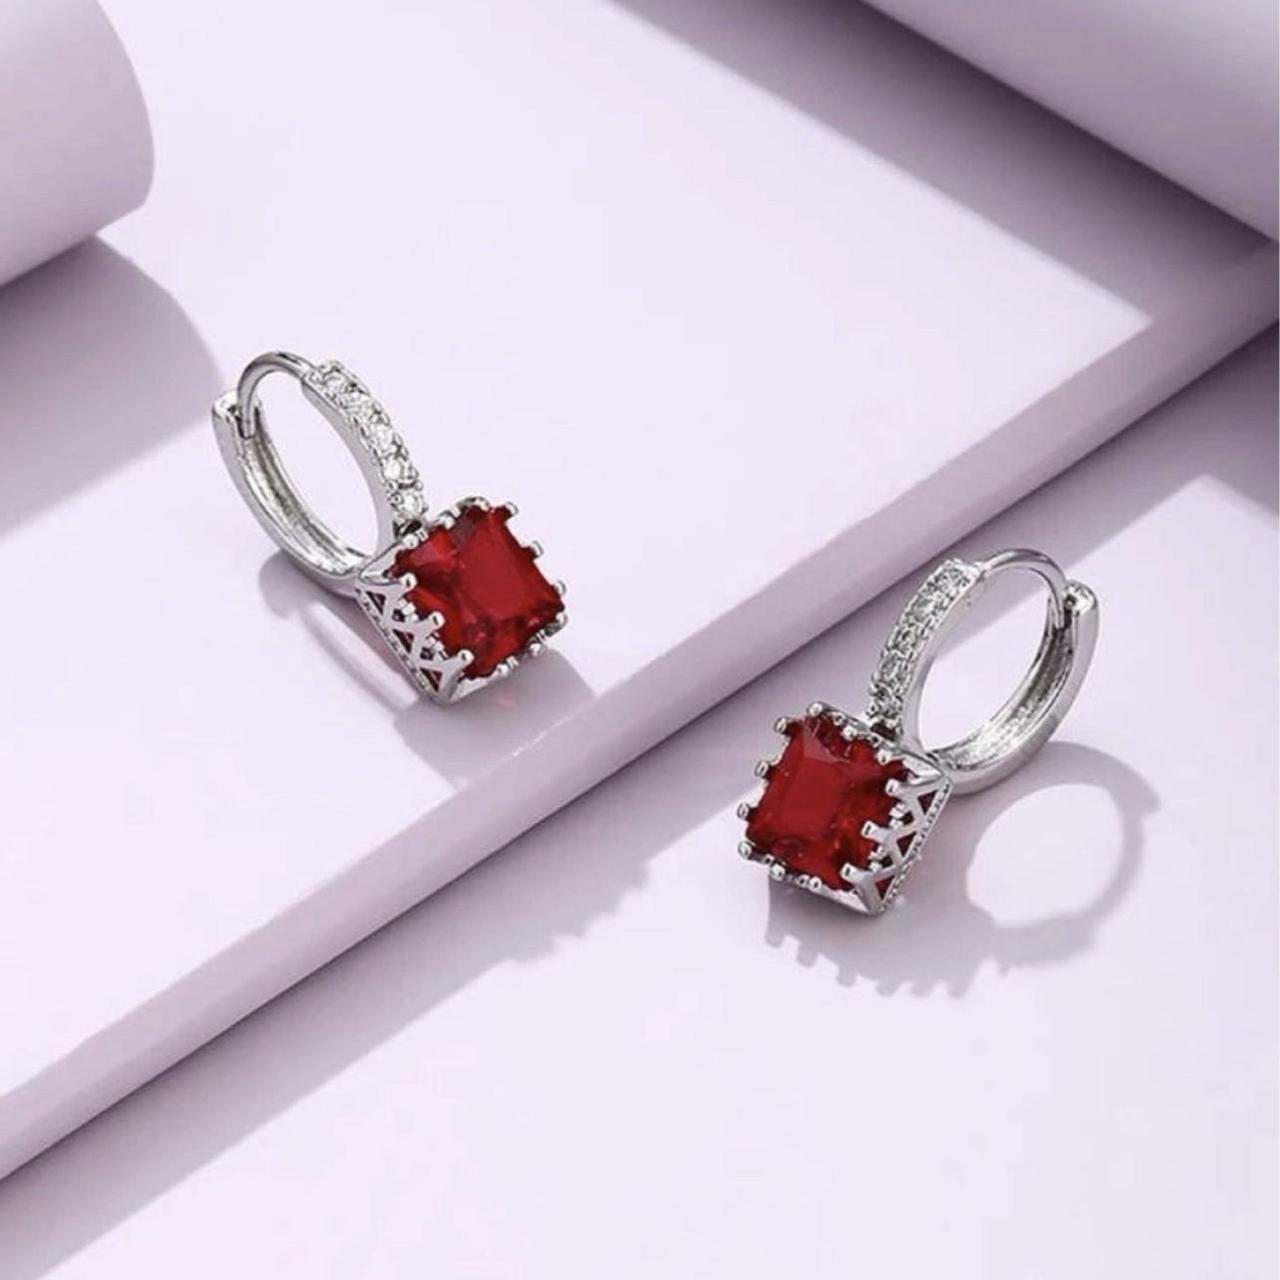 Product Image 4 - New. Red gemstone earrings .